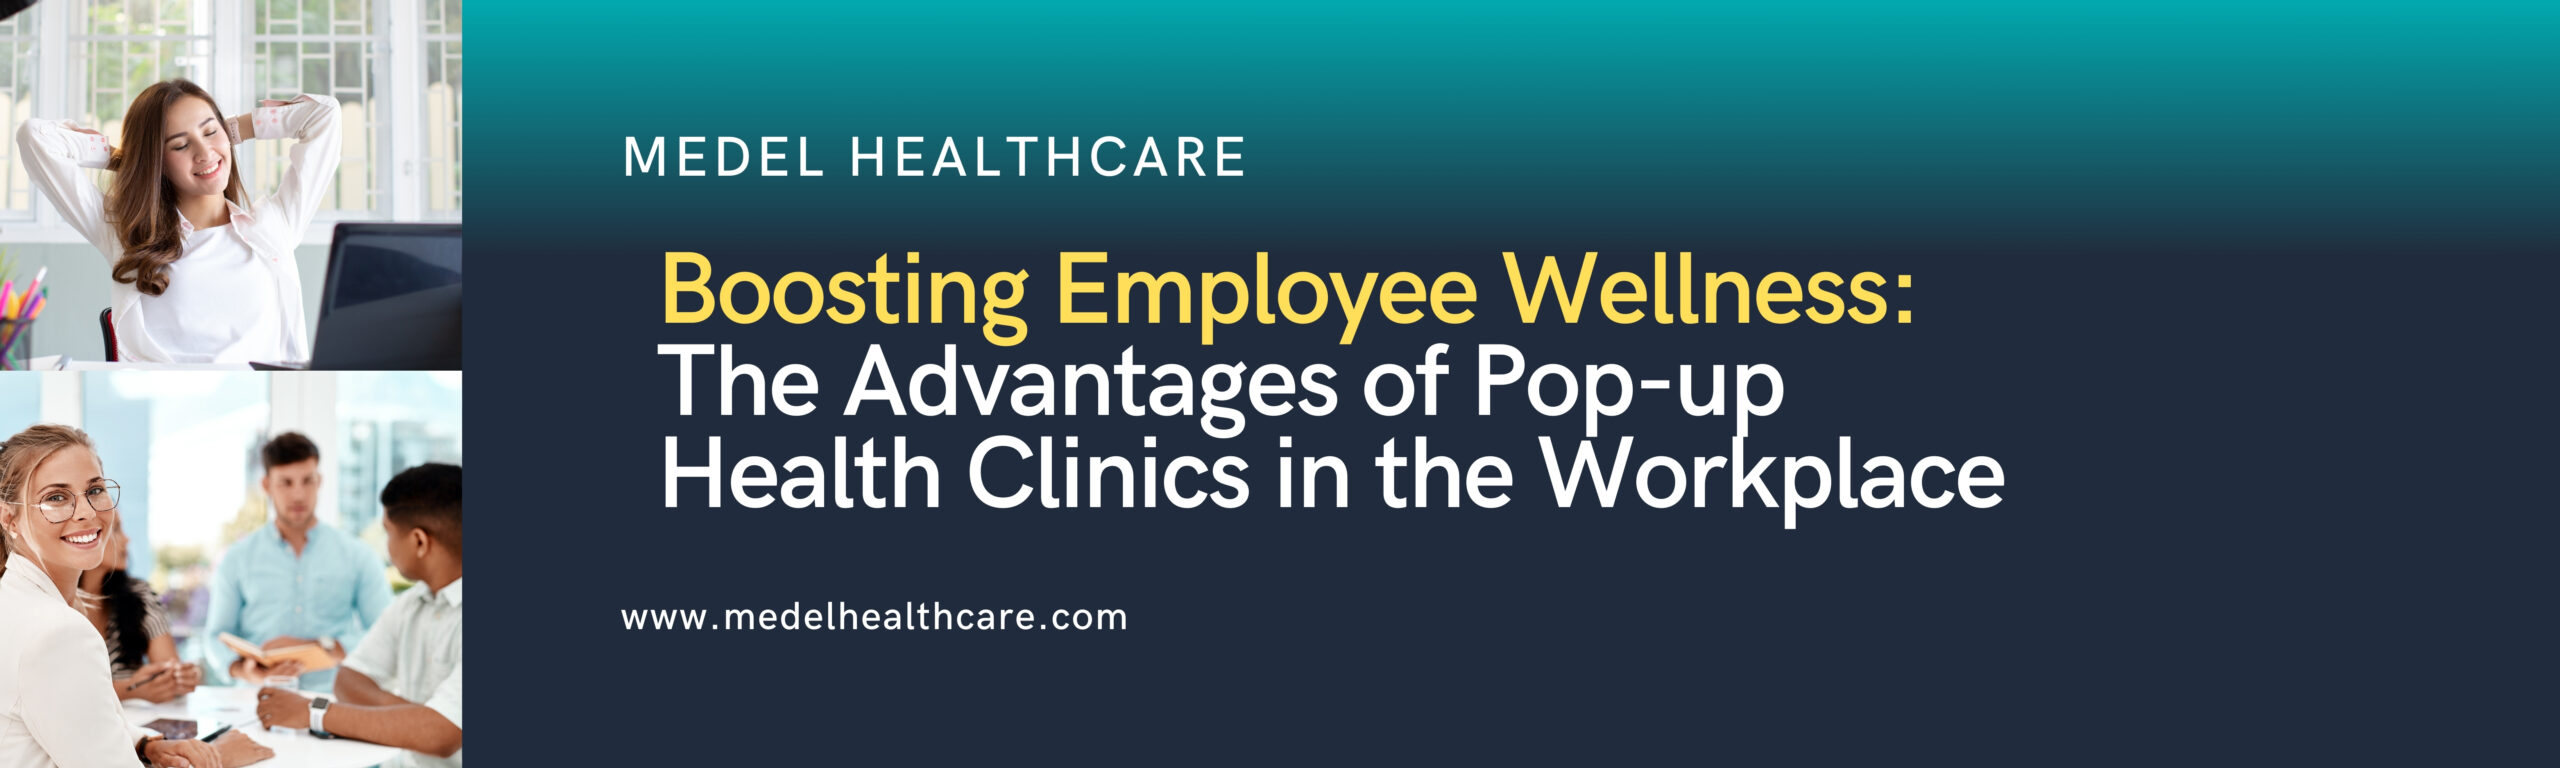 Boosting Employee Wellness: The Advantages of Pop-up Health Clinics in the Workplace